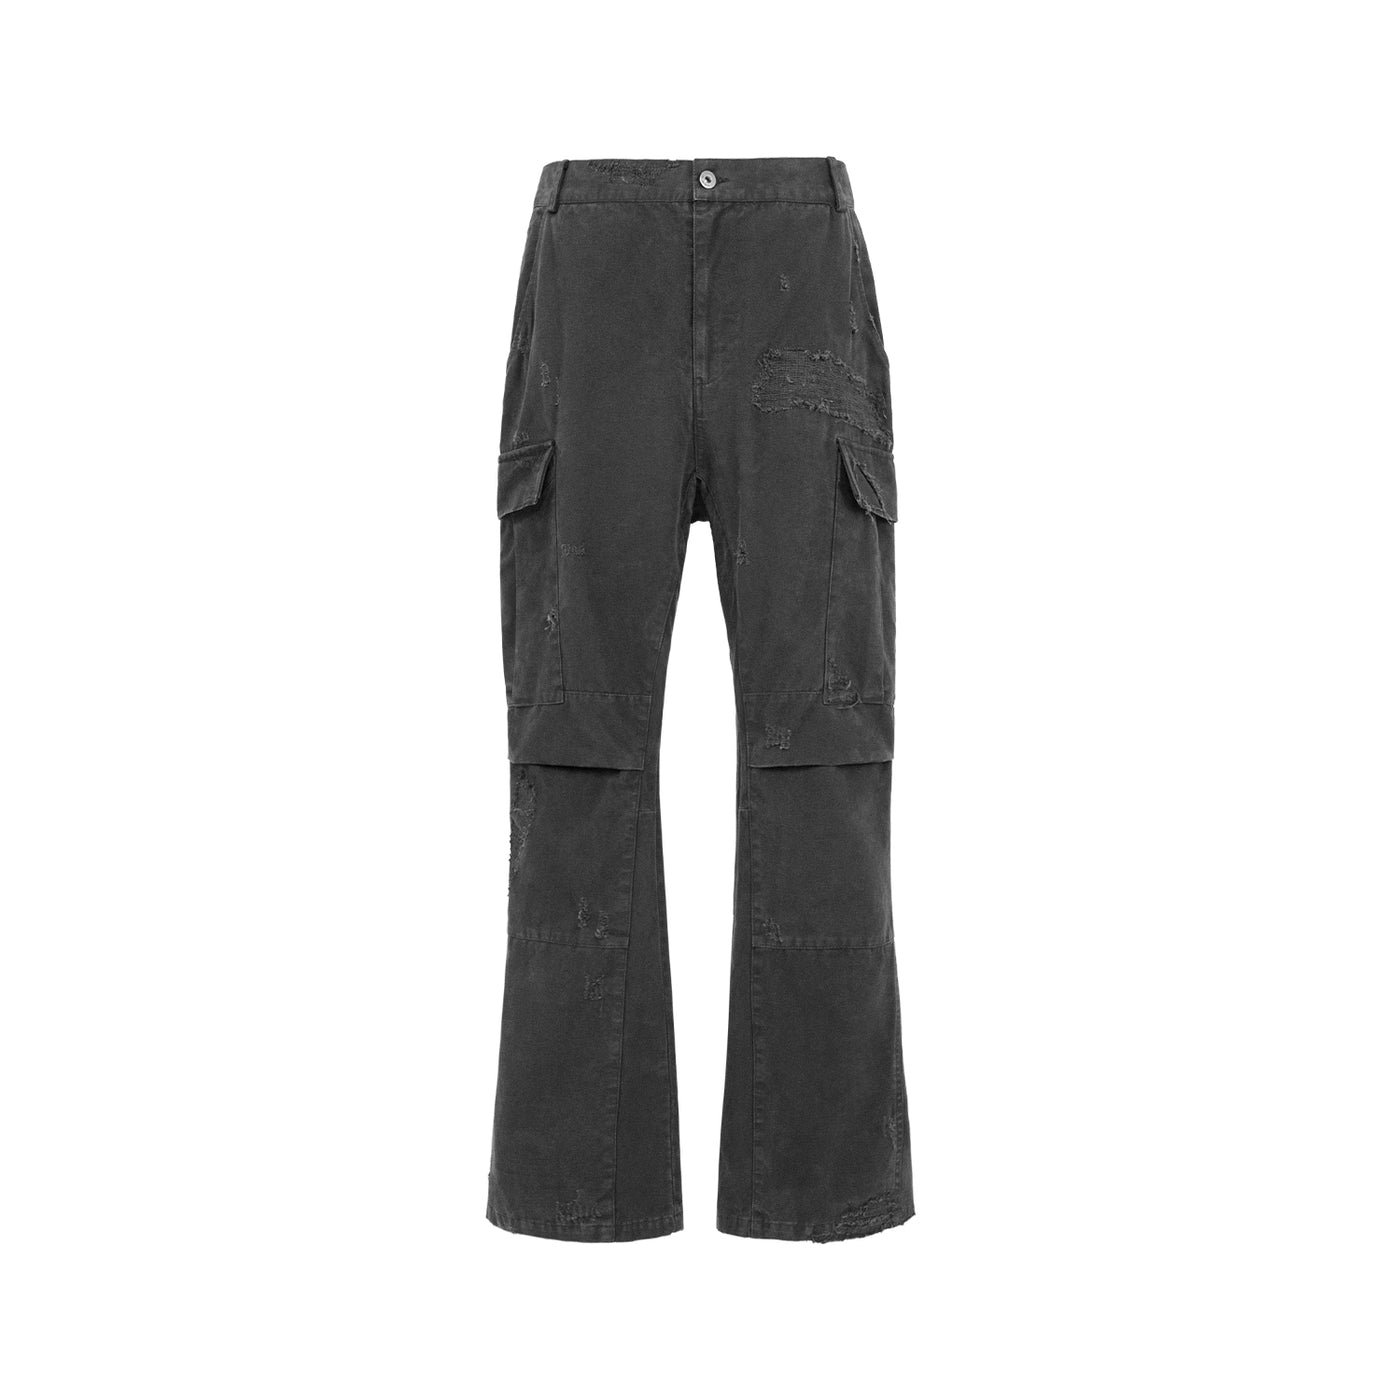 UNDERWATER Needle Embroidery Distressed Flared Cargo Work Pants